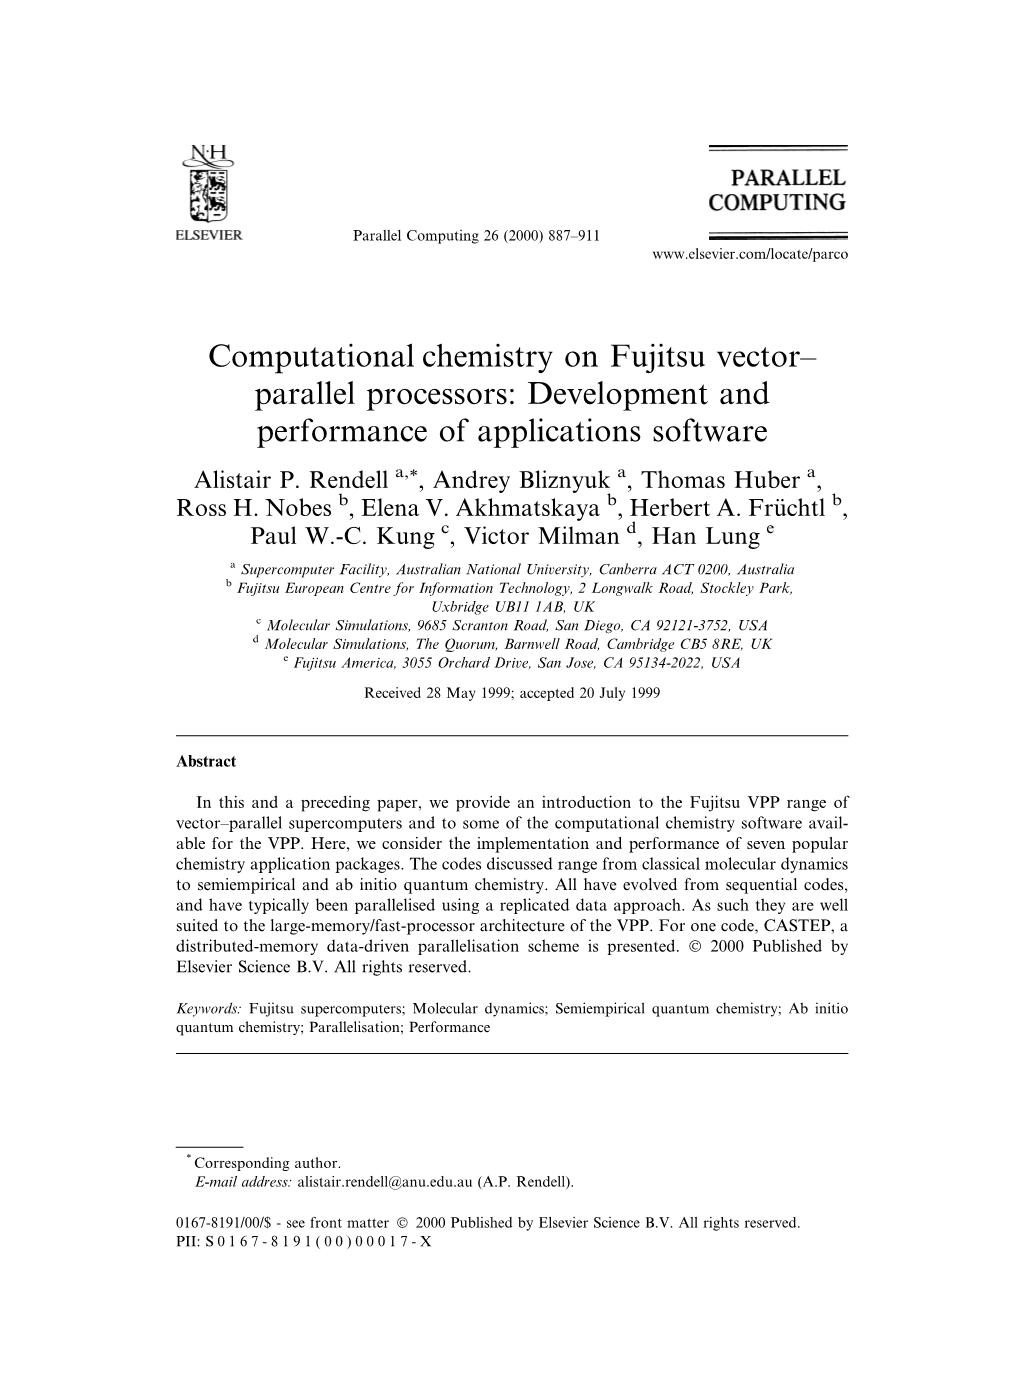 Computational Chemistry on Fujitsu Vector± Parallel Processors: Development and Performance of Applications Software